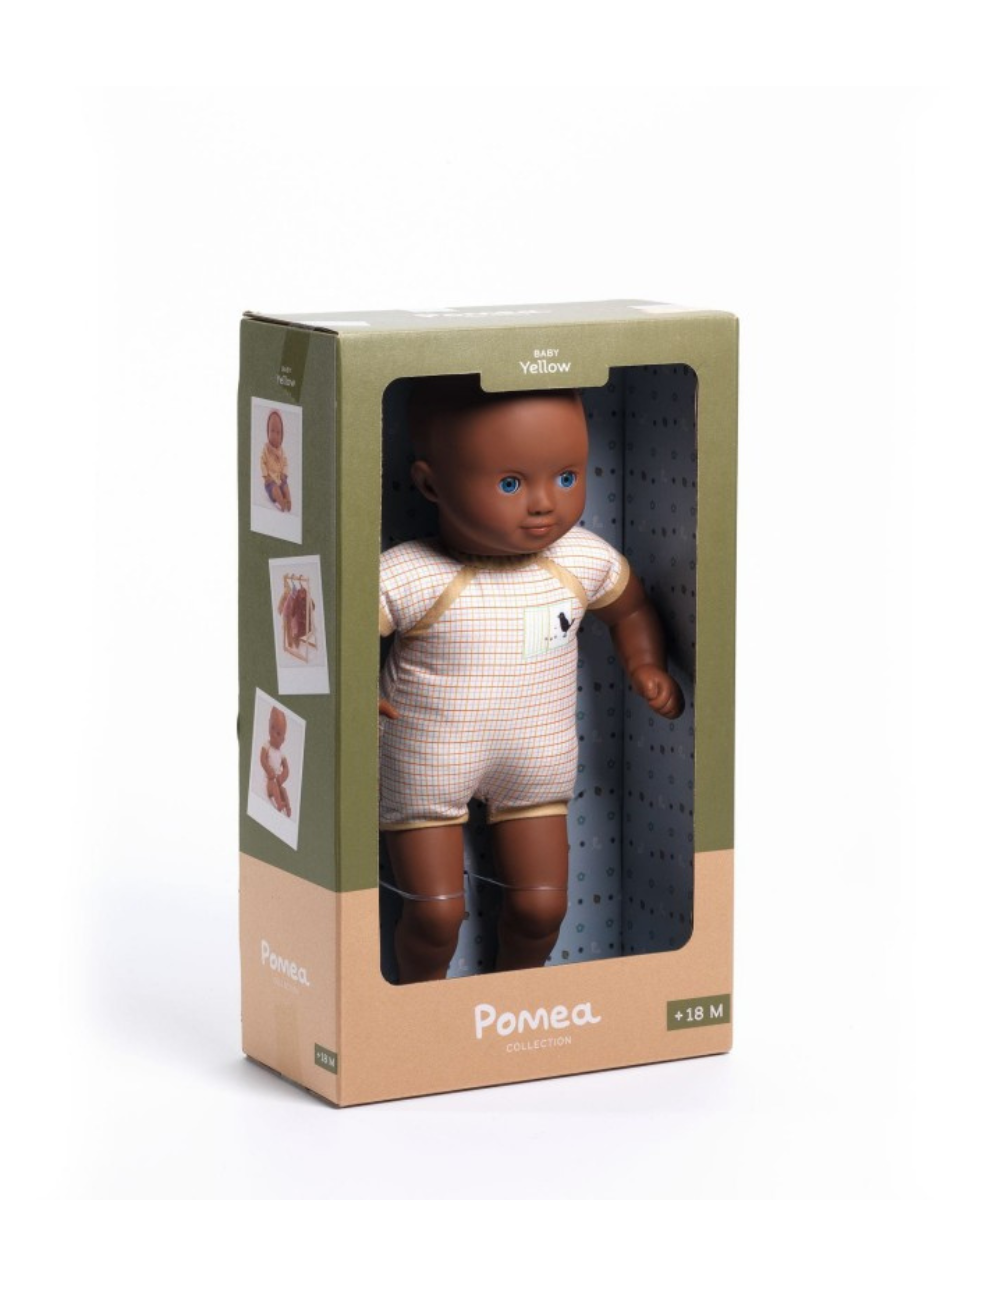 Dressable Pomea Soft Body Doll in Yellow